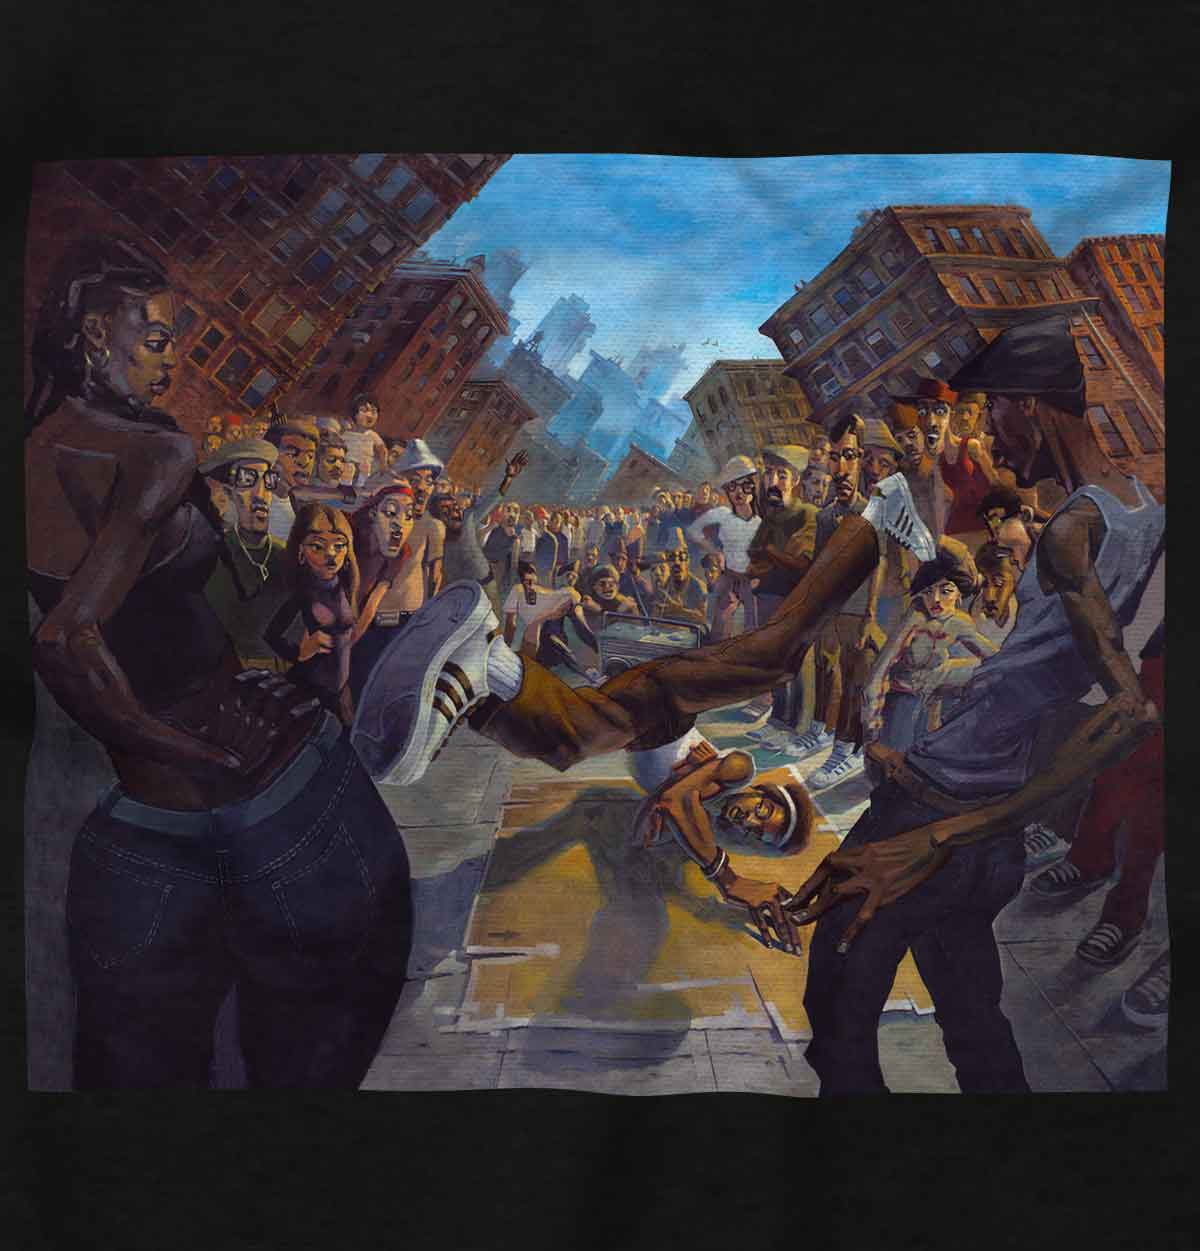 A painting of a nighttime breakdance competition in NYC that shows the energetic and colorful movements of B-boys and B-girls, representing hip-hop culture.